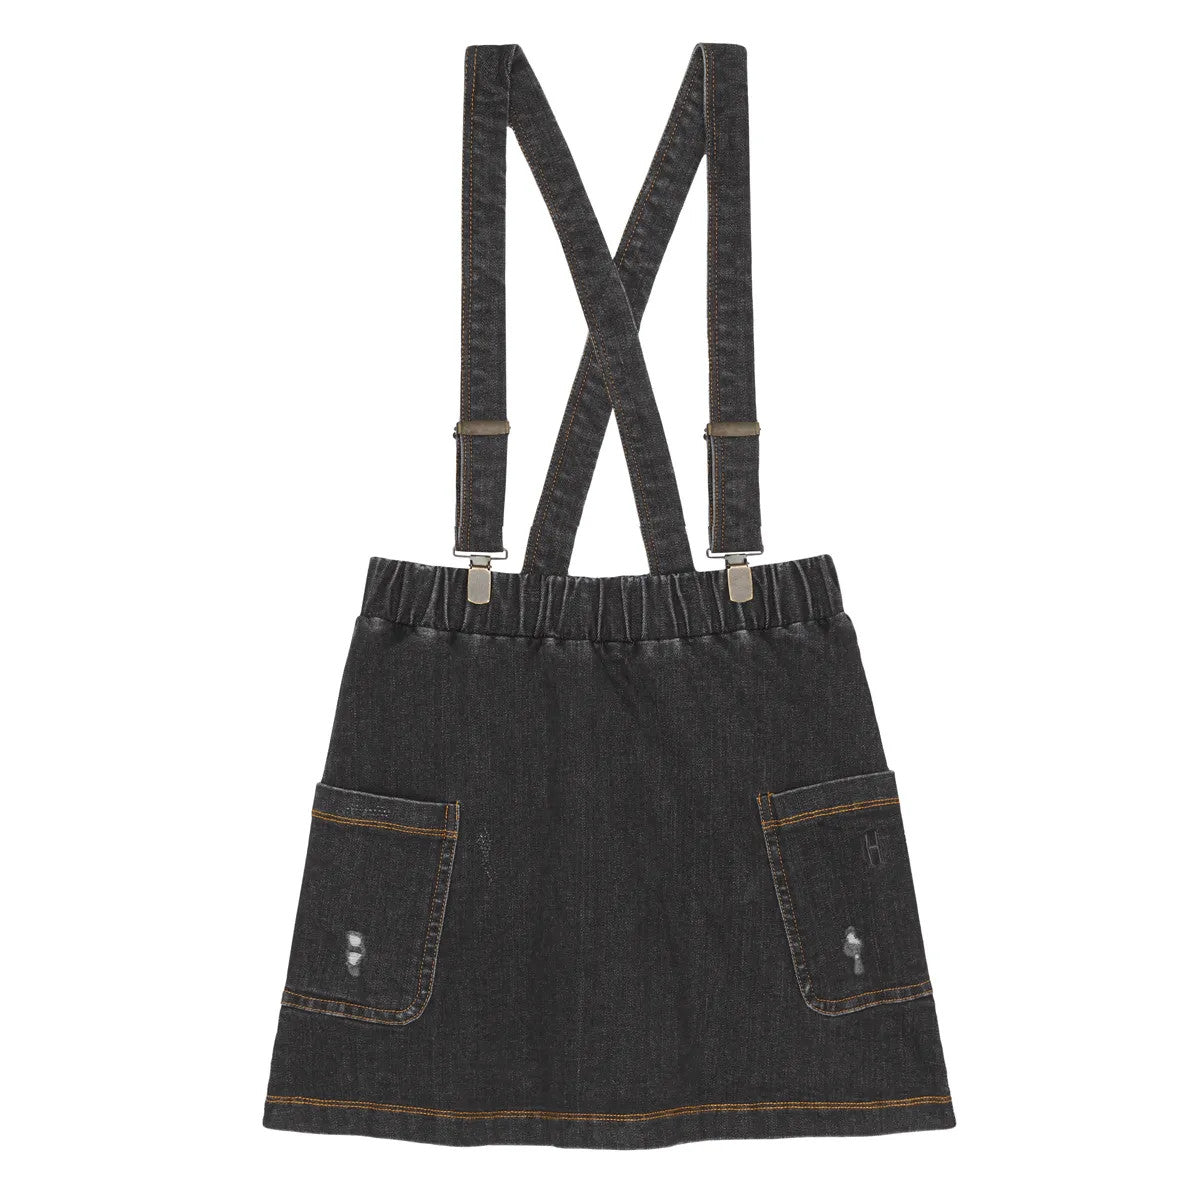 Little Hedonist comfortable, yet fancy, Black Denim dress with suspenders, to be worn for any occasion. Organic kids fashion.